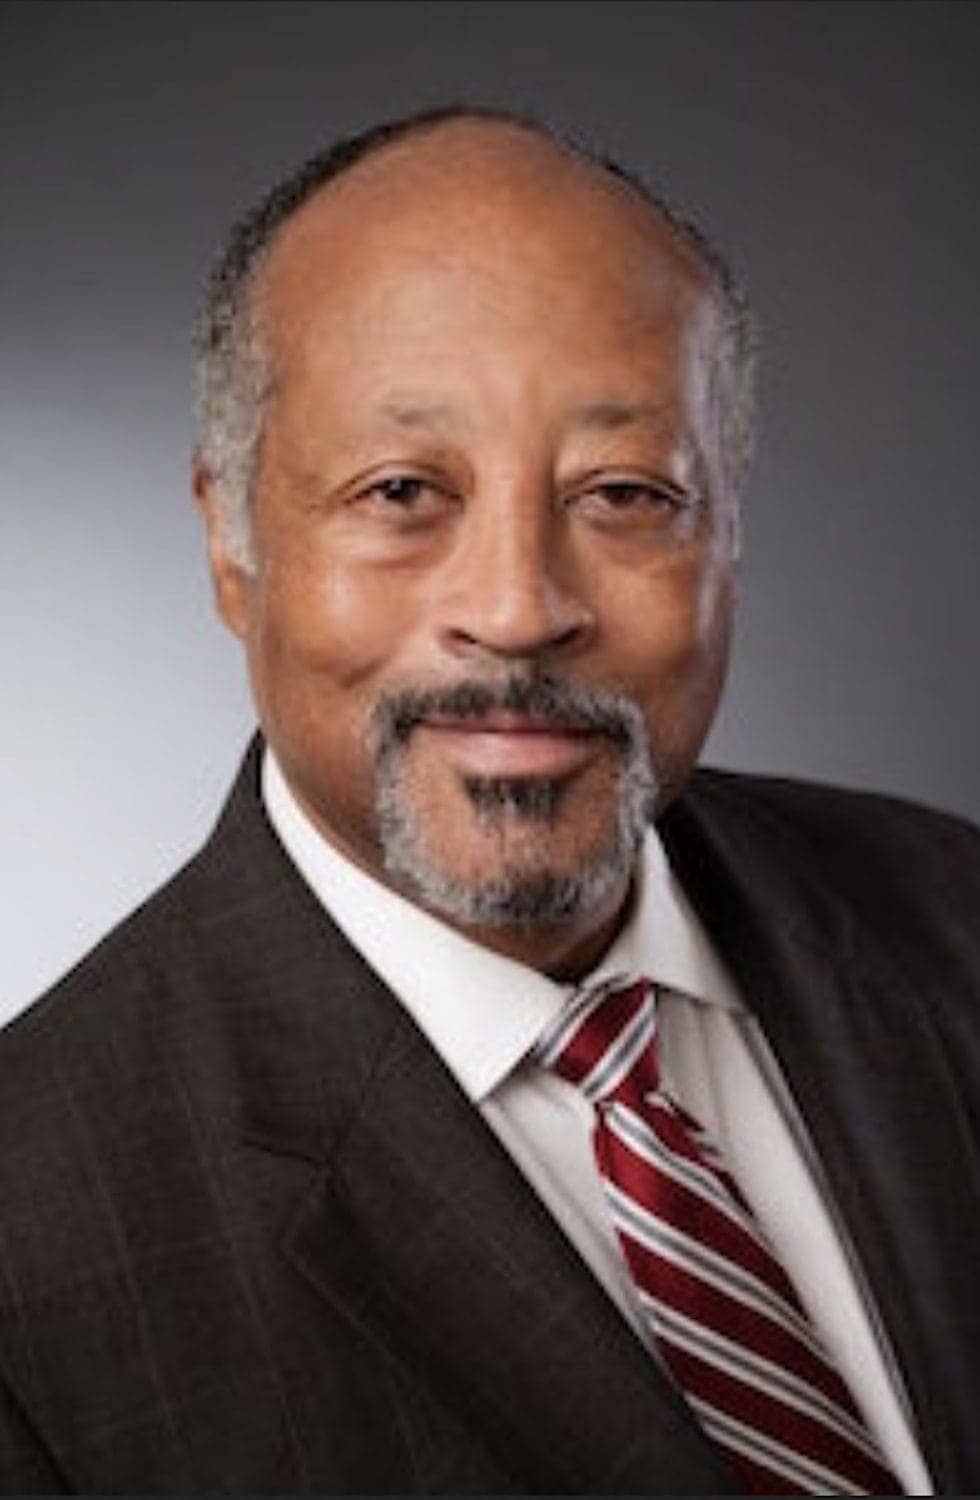 Harry-Alford, National Black Chamber of Commerce champion Harry C. Alford dies, Culture Currents 